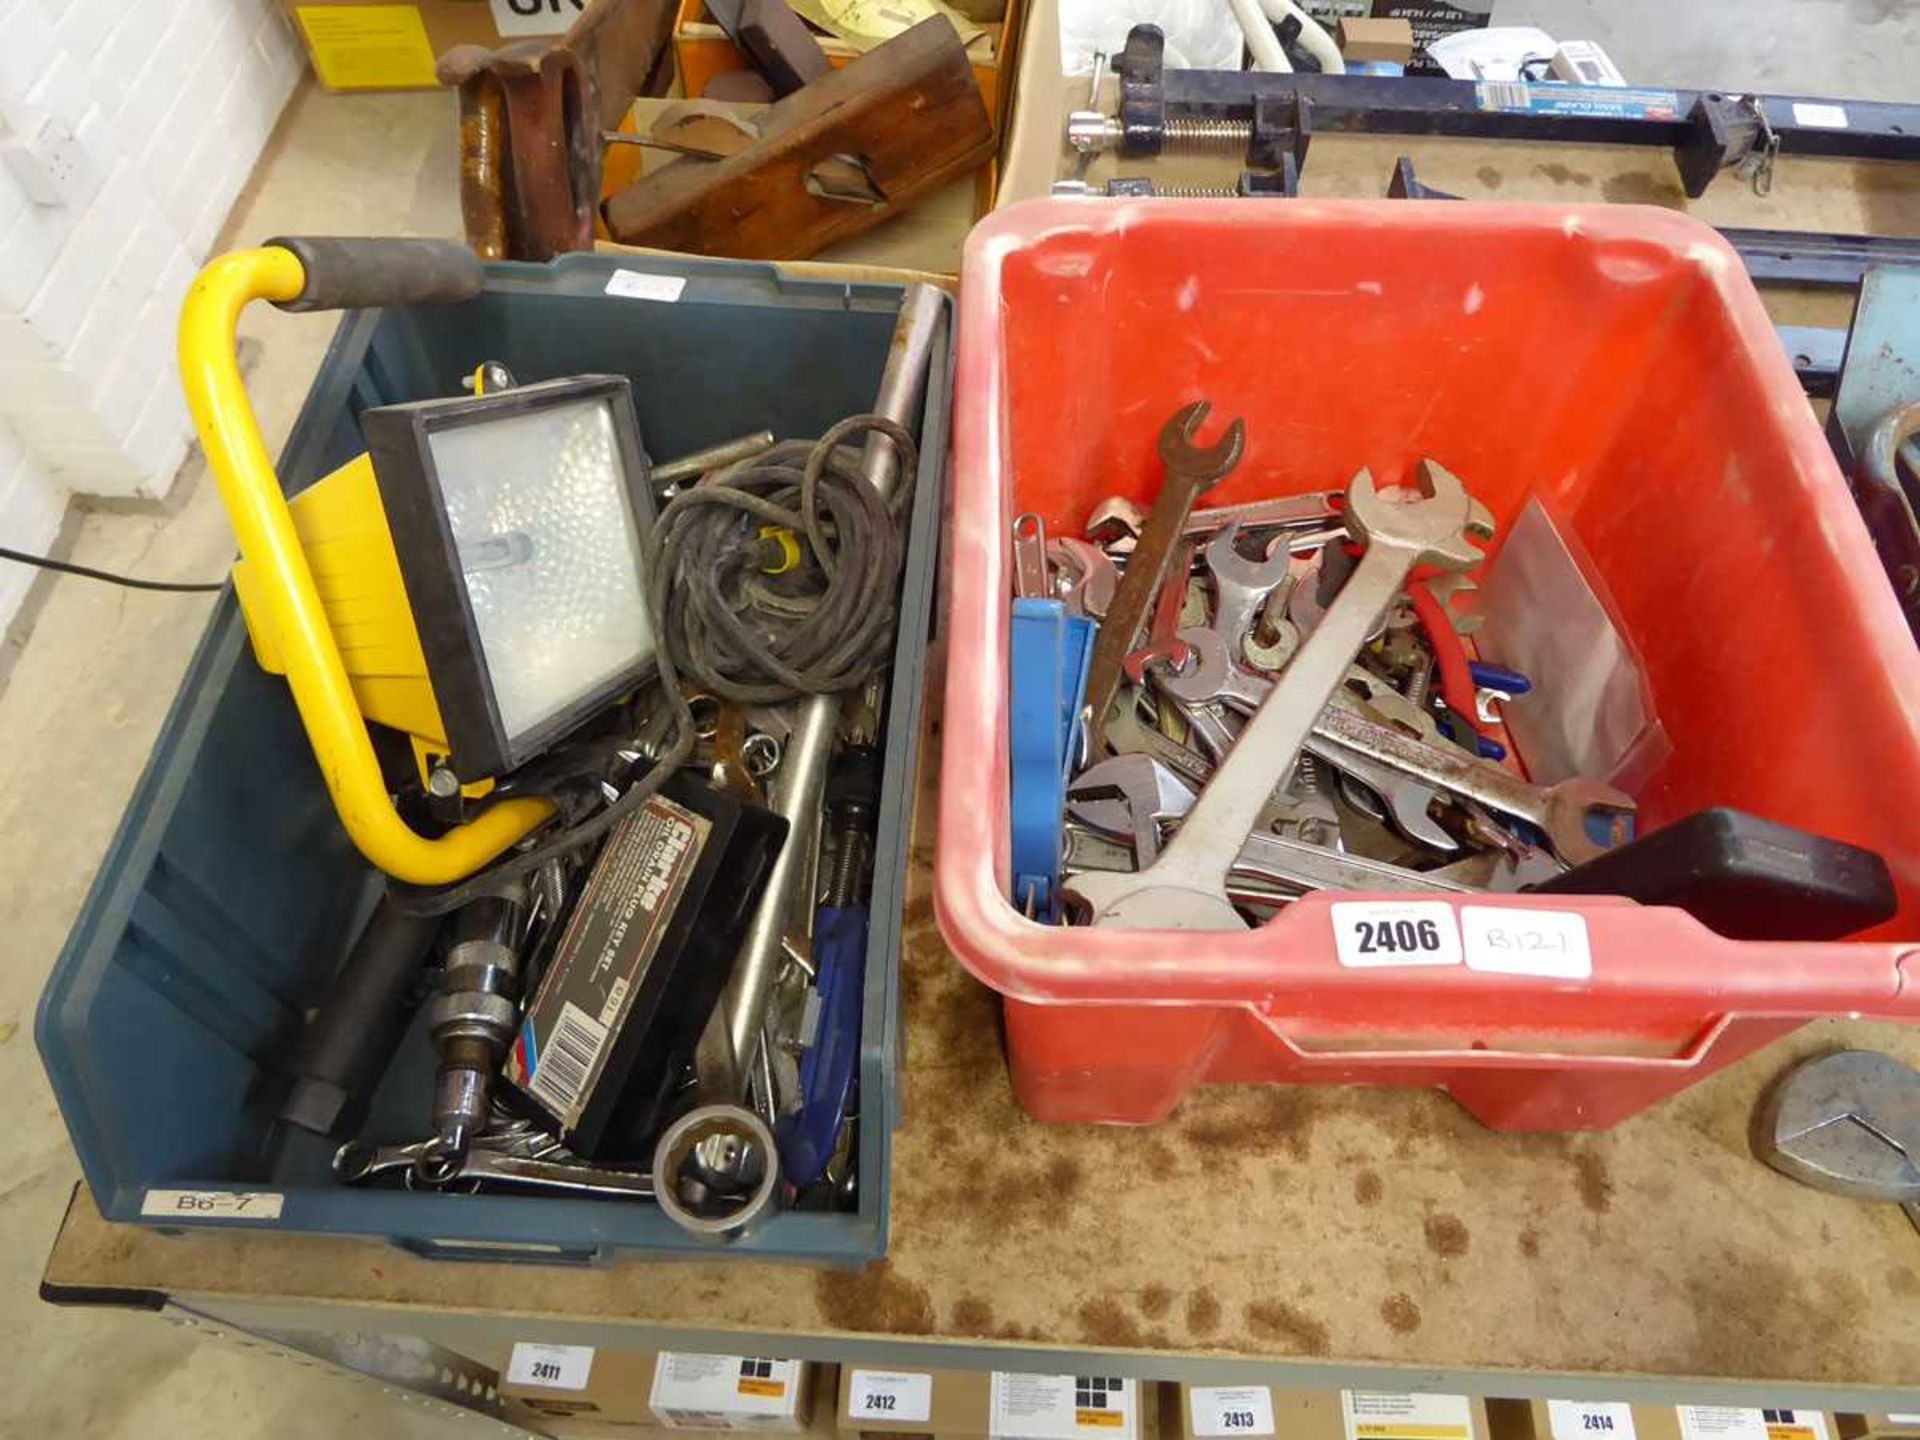 2 crates containing mixed size spanners, sockets, LED work light, etc.